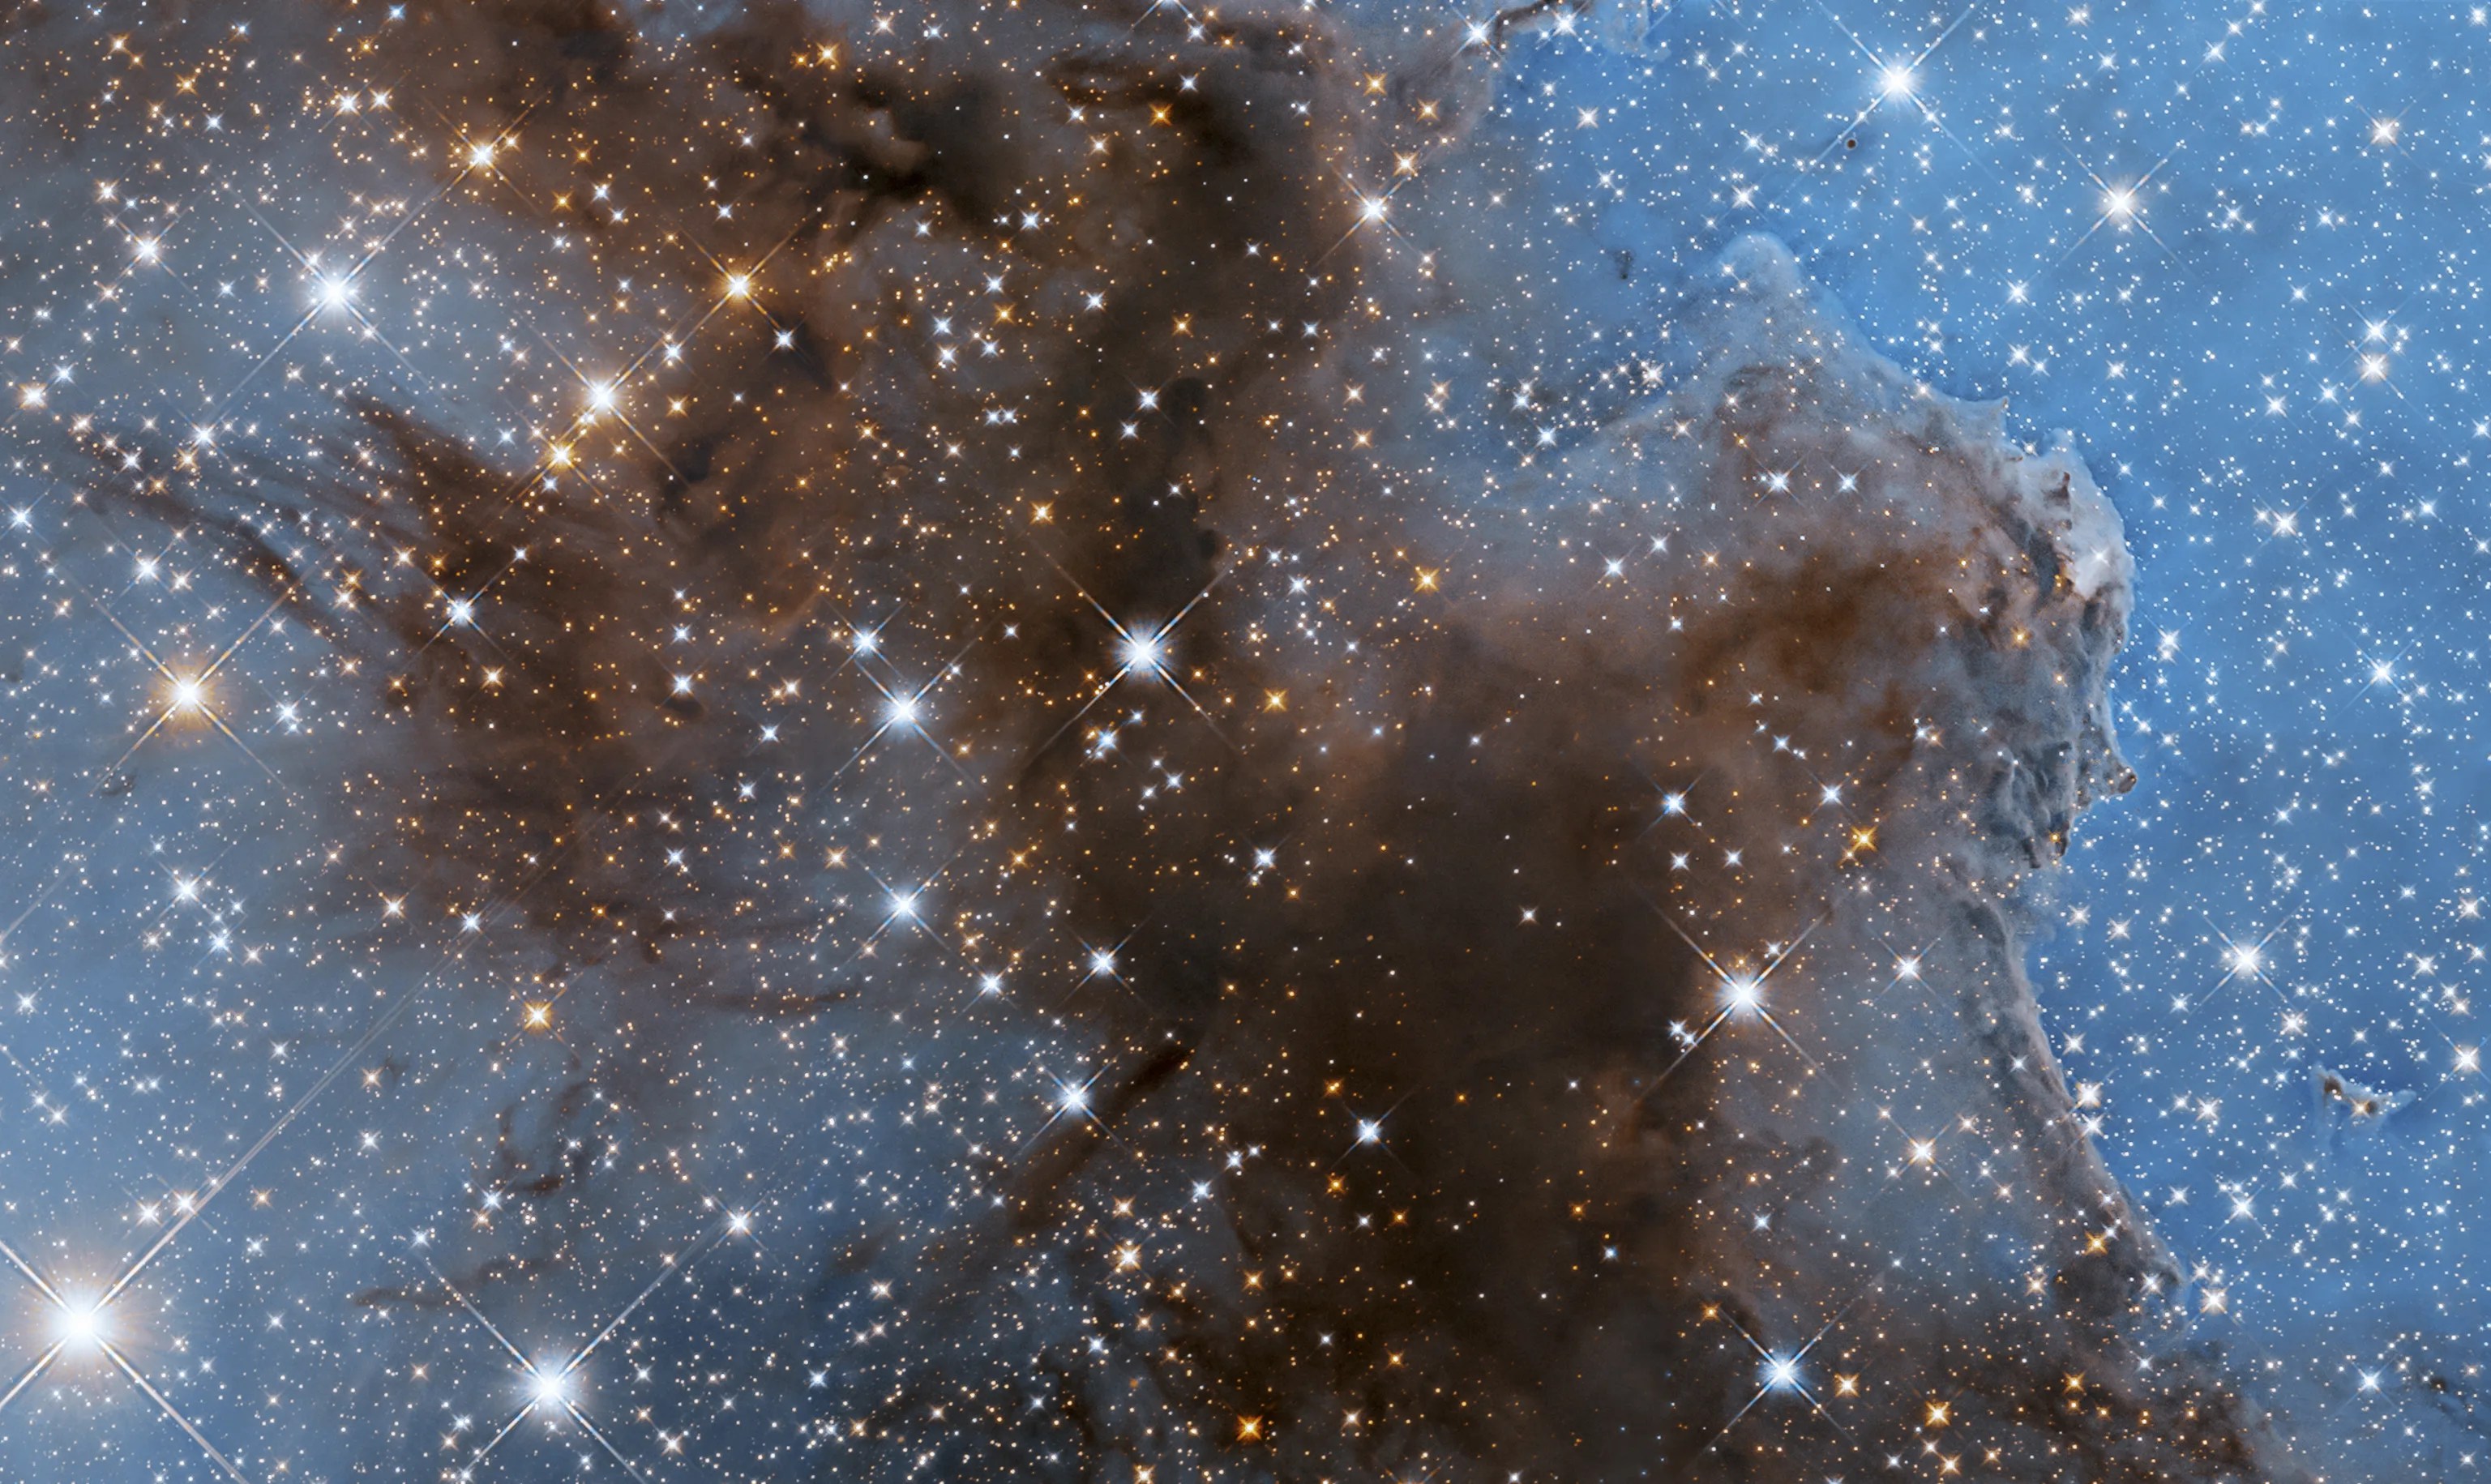 Dark, reddish-brown cloud fills the screen stretching from upper-left to filling the bottom of the image. Blue background is dotted with bright-white and yellow-orange stars.